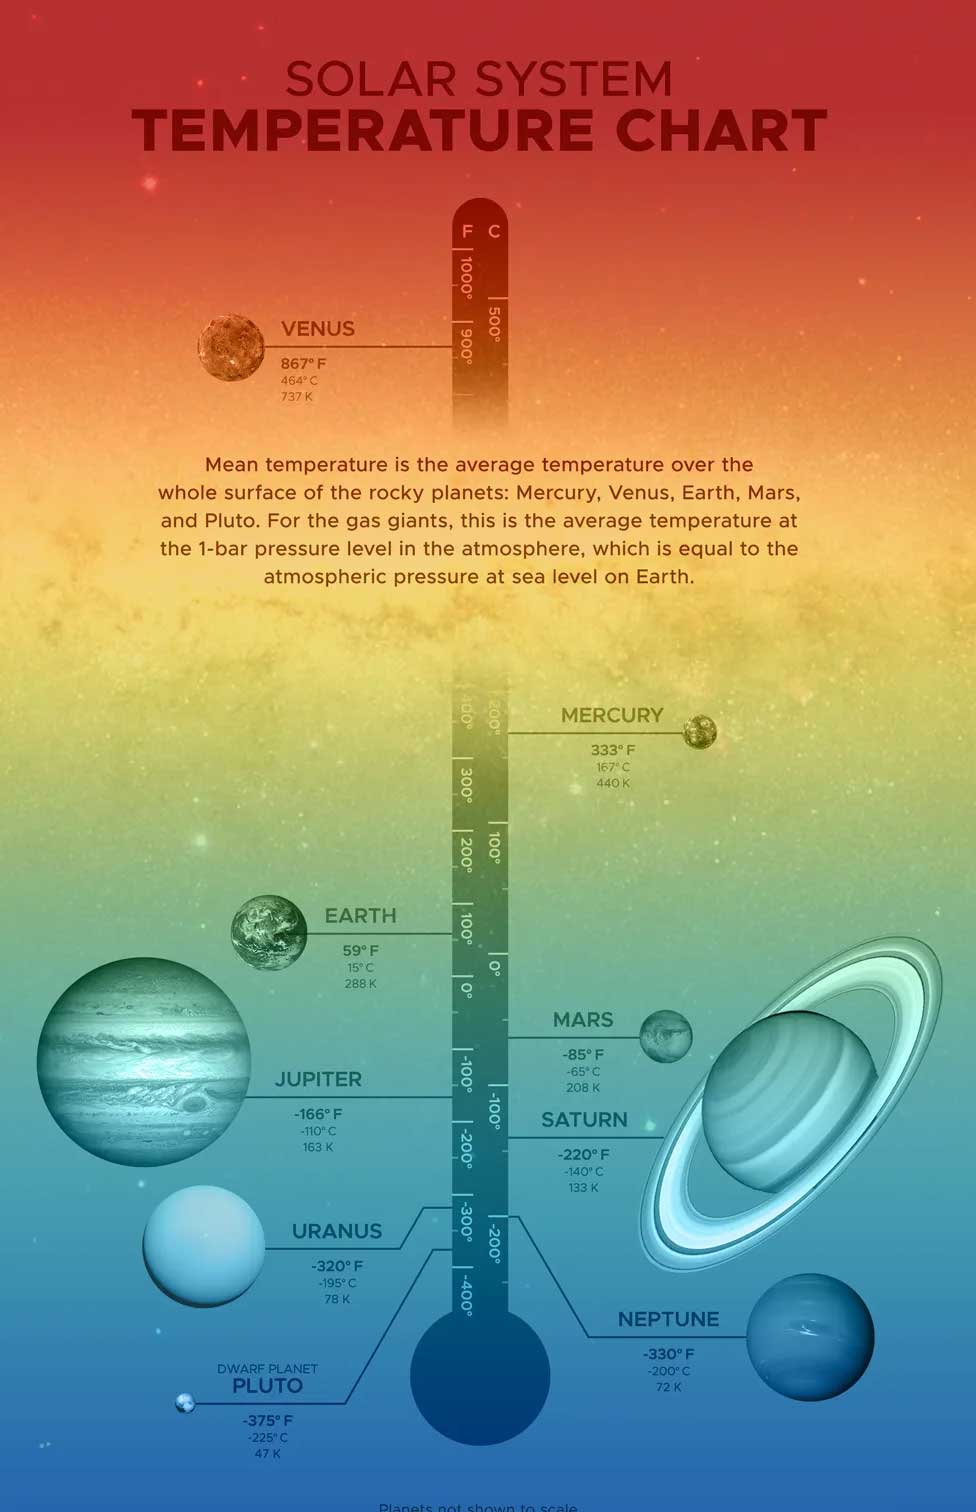 A colorful. symbolic thermometer showing planets in our solar system ordered from hottest a the top to coldest at the bottom. The top of the graphic is red, then it fades to orange, yellow, green, then blue. It has illustrations of the planets.